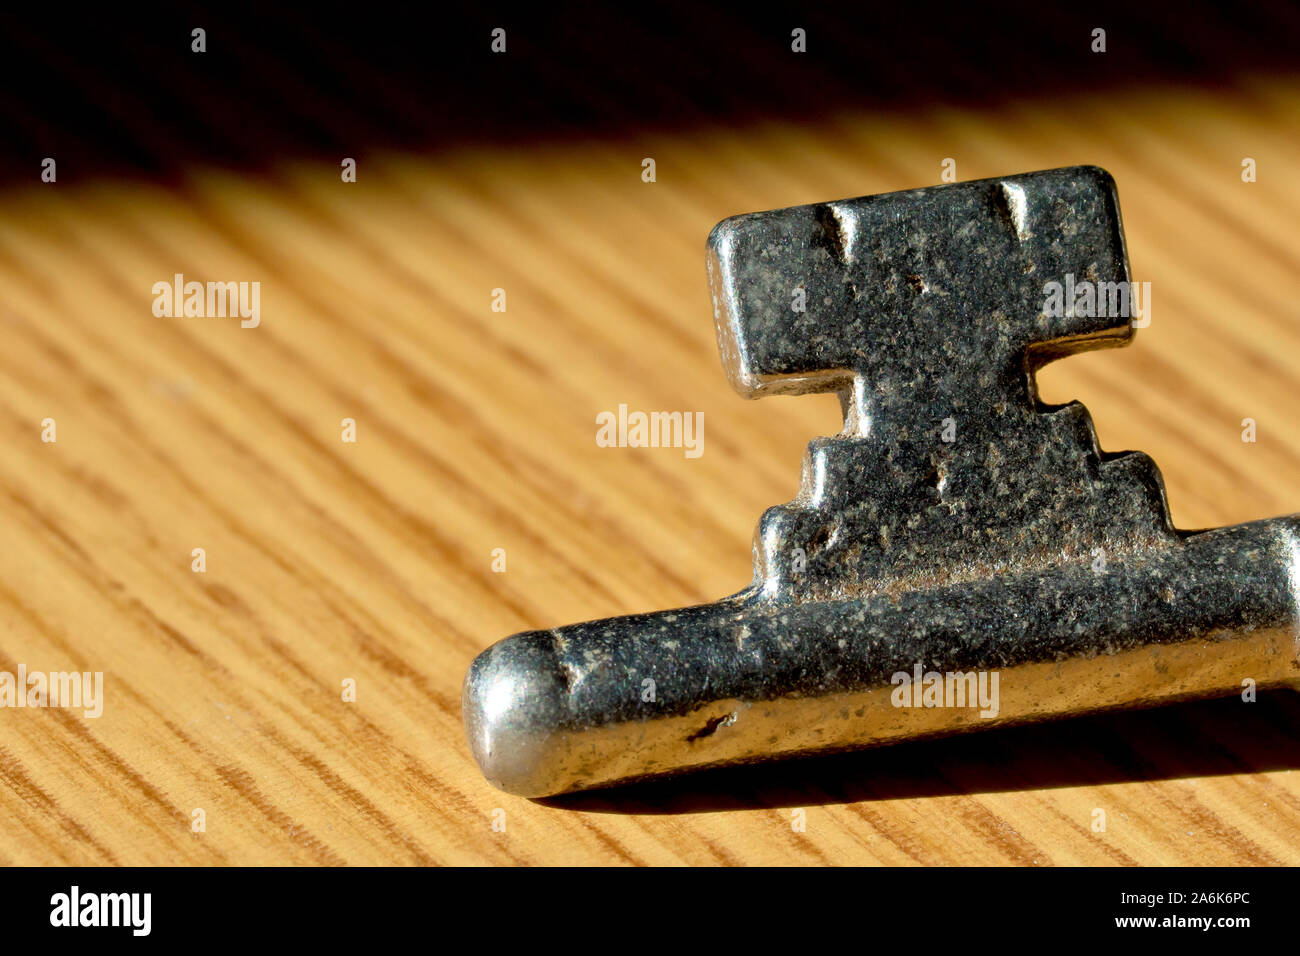 Close up of the bottom end of an old, steel key laying on a brown wooden surface in the sun. Stock Photo